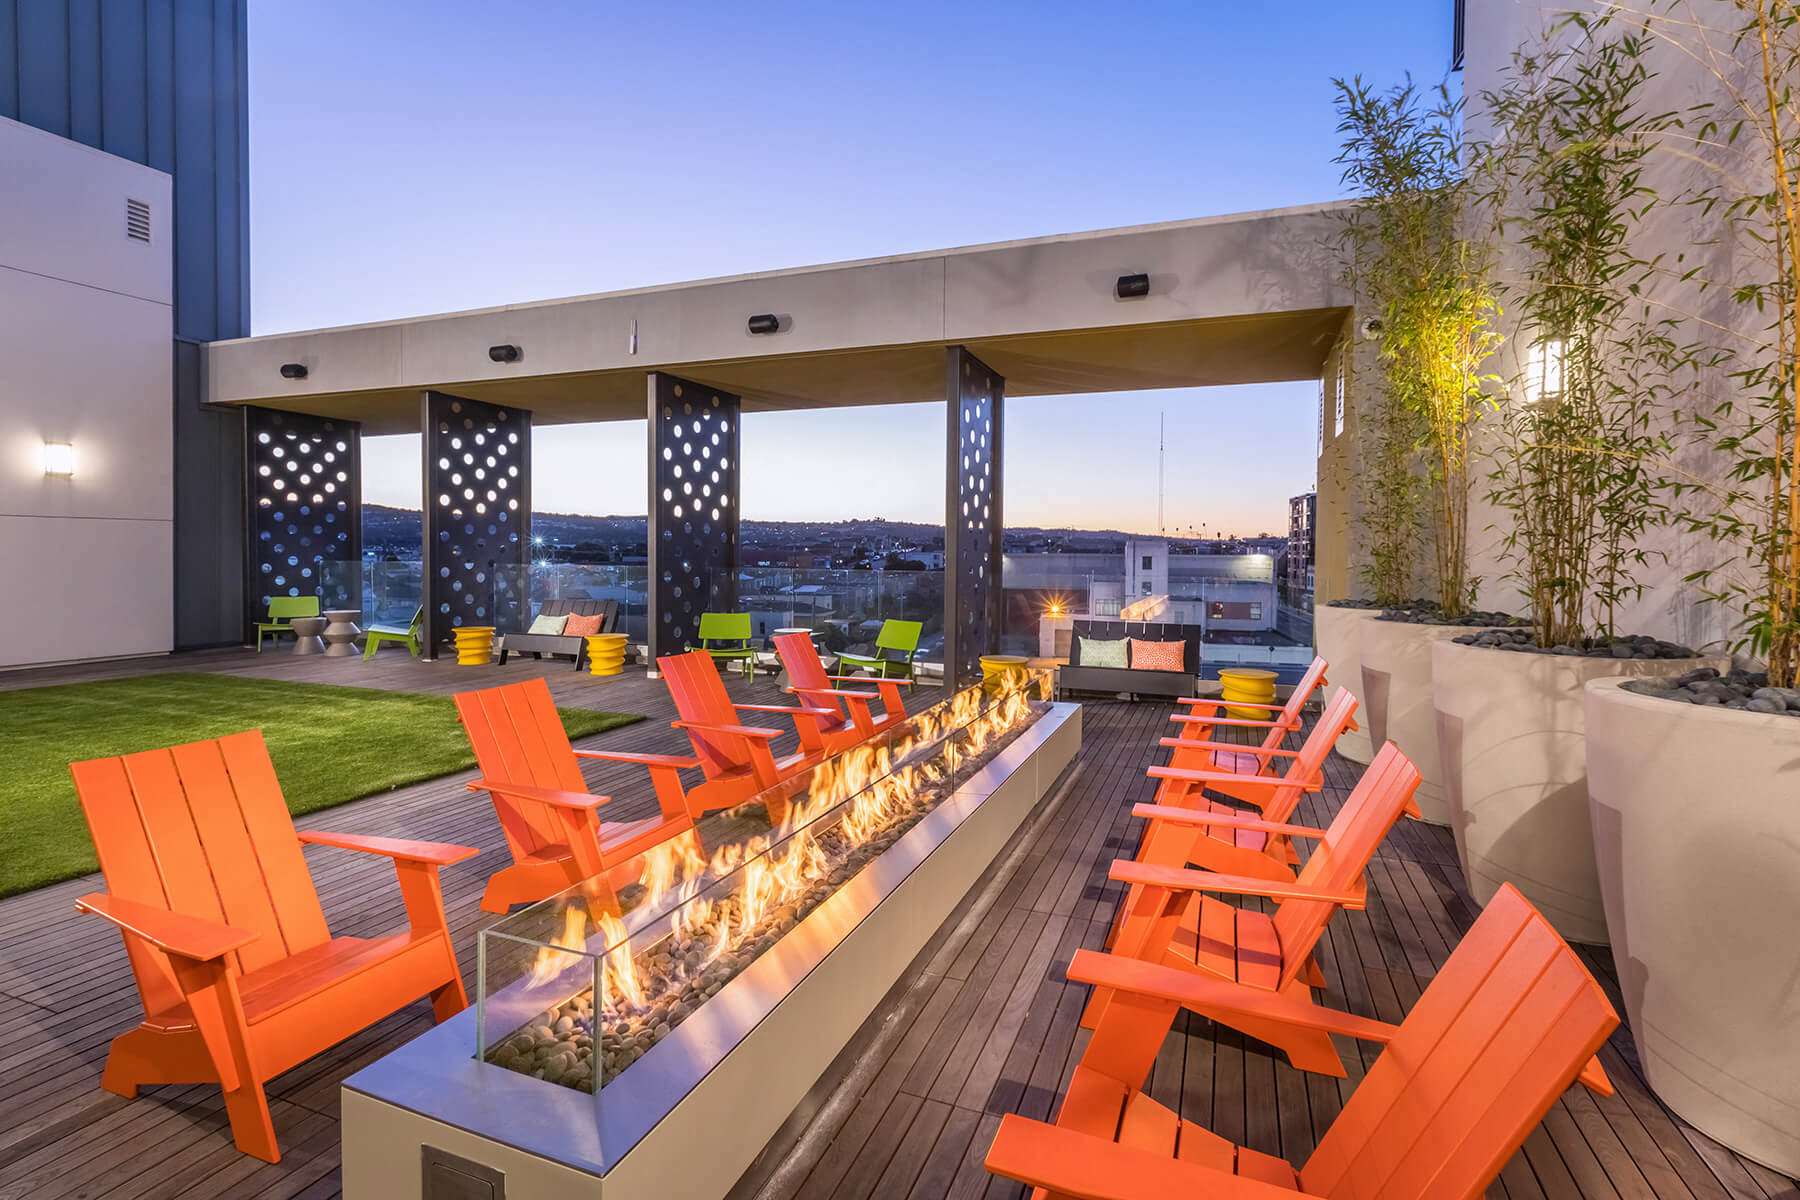 The rooftop terrace fire pit at the Altitude Apartments in San Francisco, California.